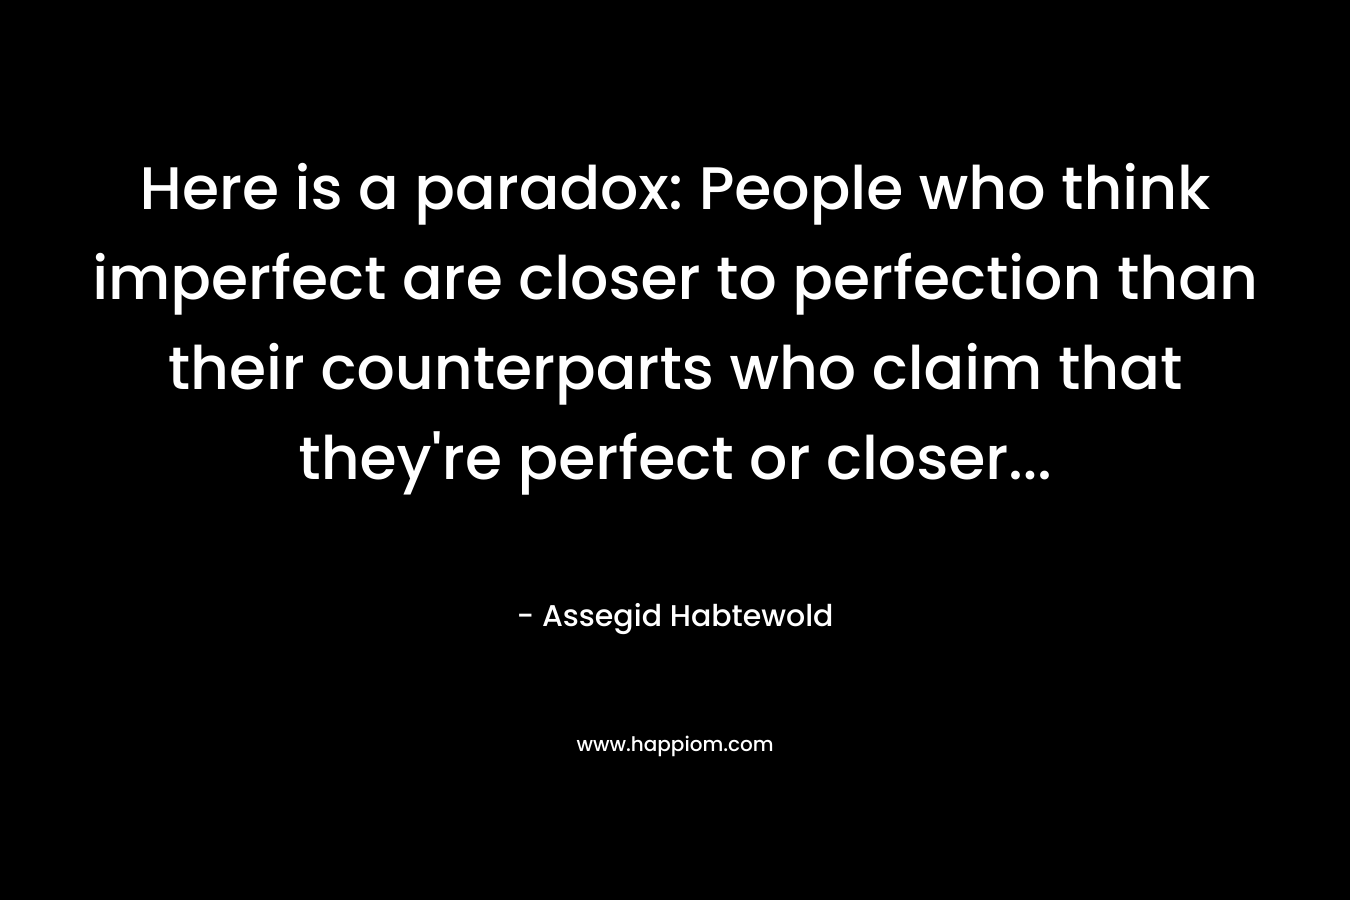 Here is a paradox: People who think imperfect are closer to perfection than their counterparts who claim that they're perfect or closer...